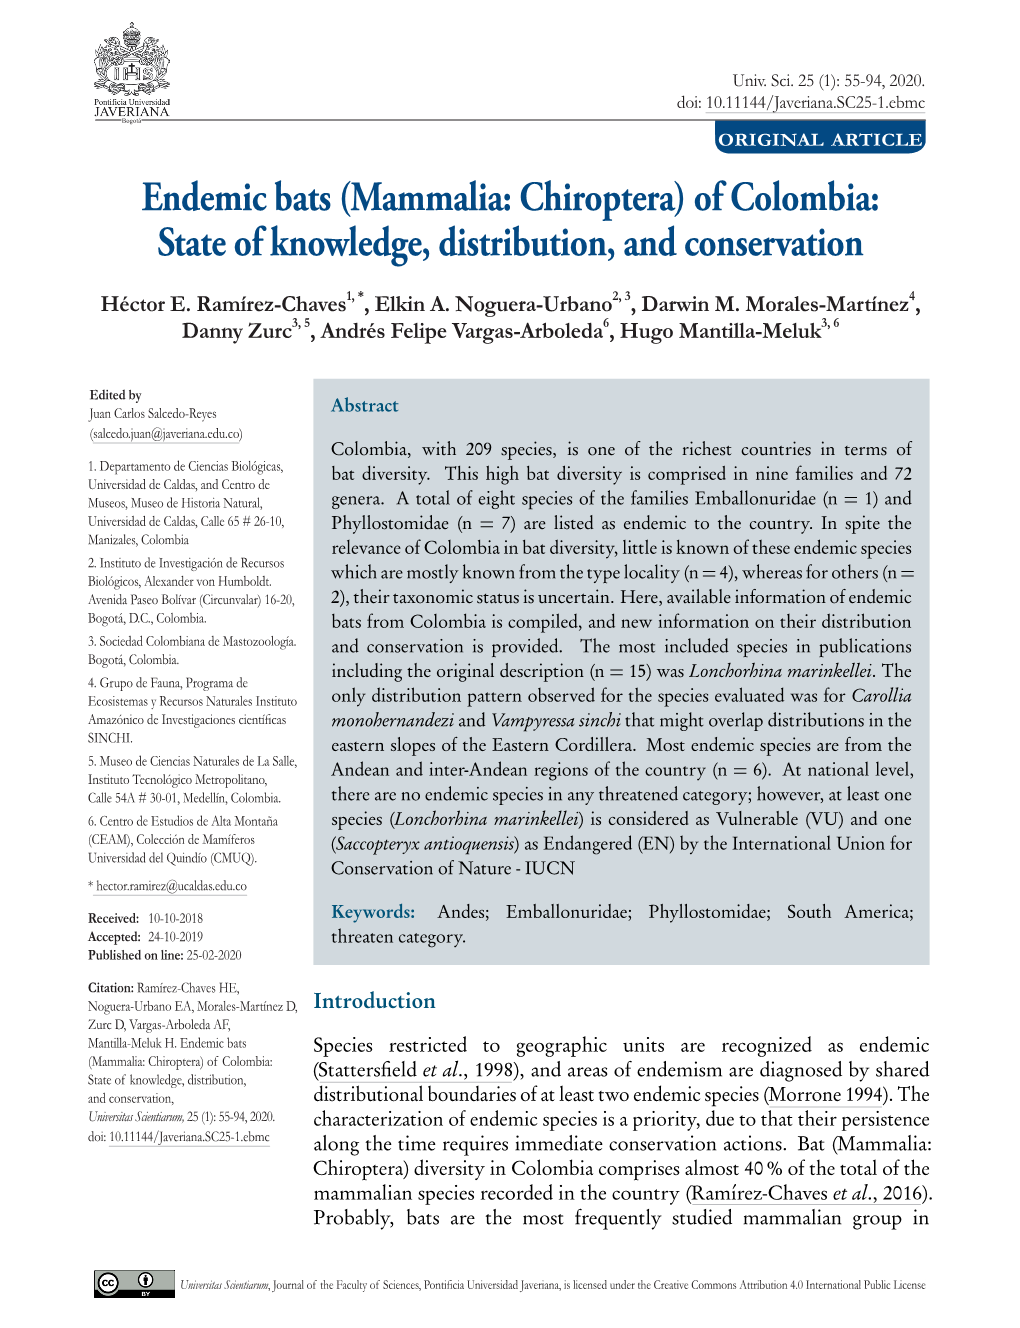 Endemic Bats (Mammalia: Chiroptera) of Colombia: State of Knowledge, Distribution, and Conservation